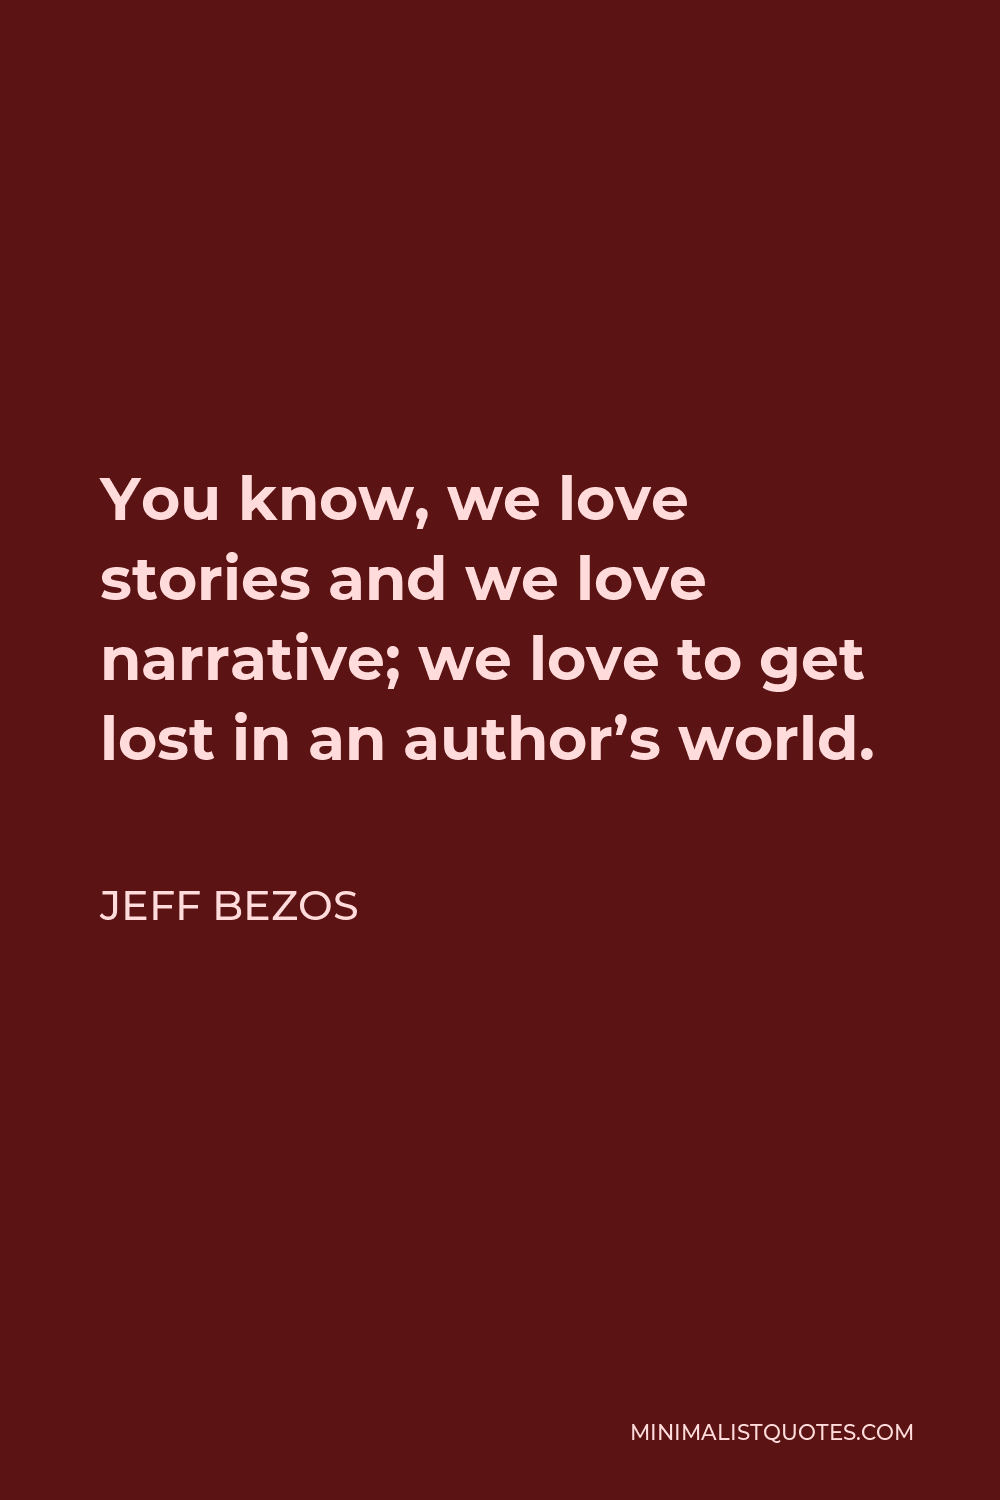 Jeff Bezos Quote - You know, we love stories and we love narrative; we love to get lost in an author’s world.